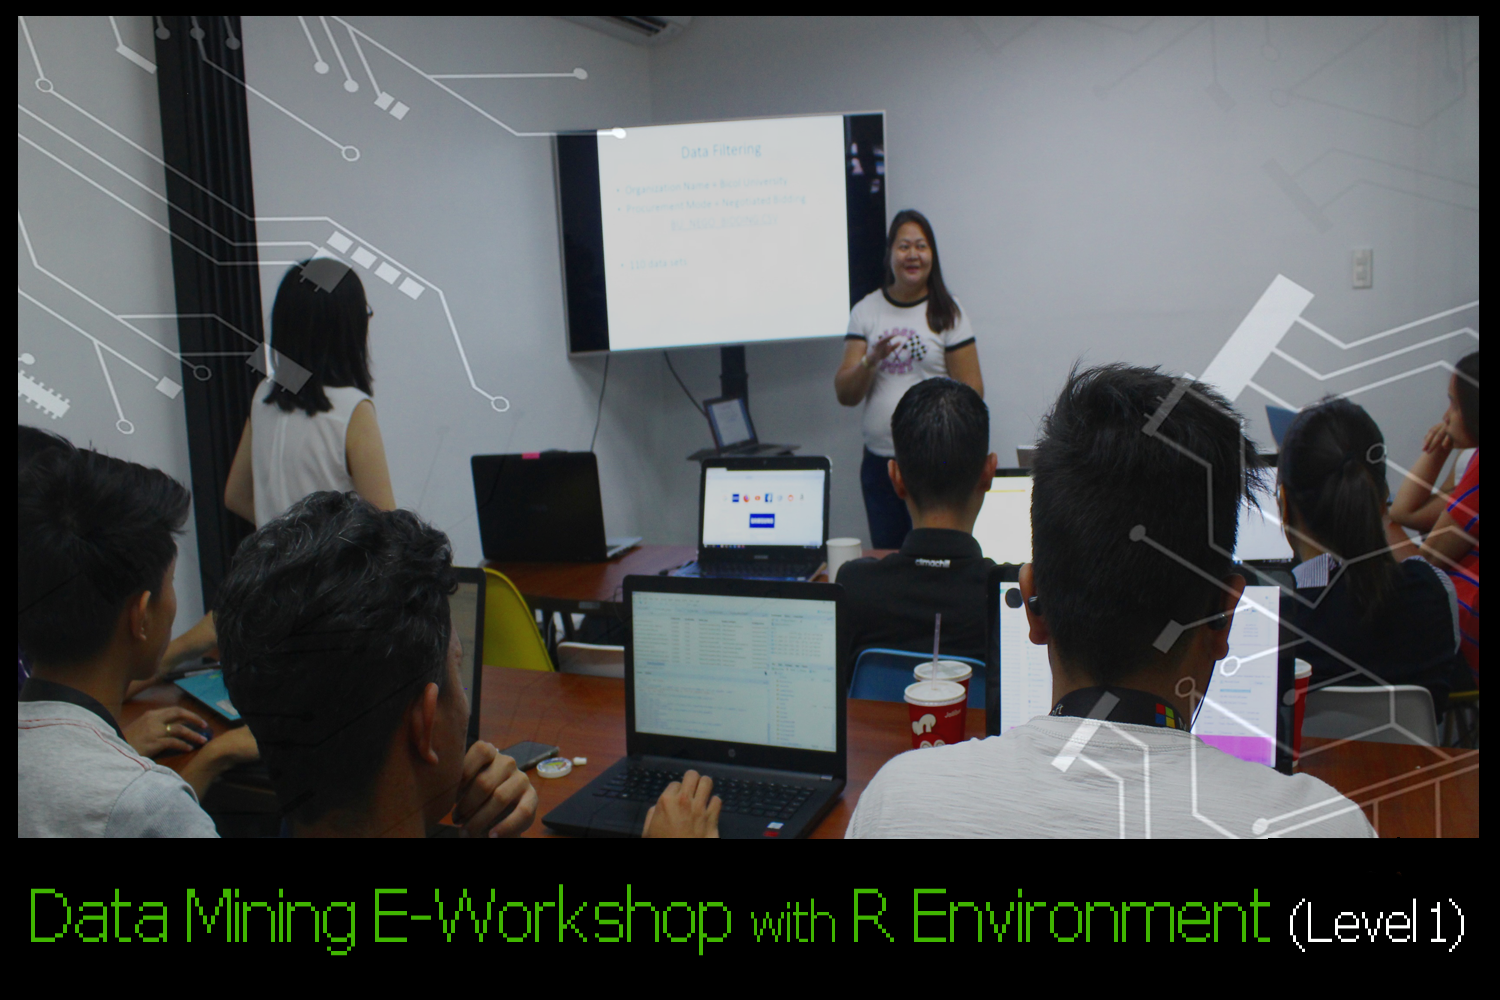 Data Mining E-Workshop with R Environment (Level 1)